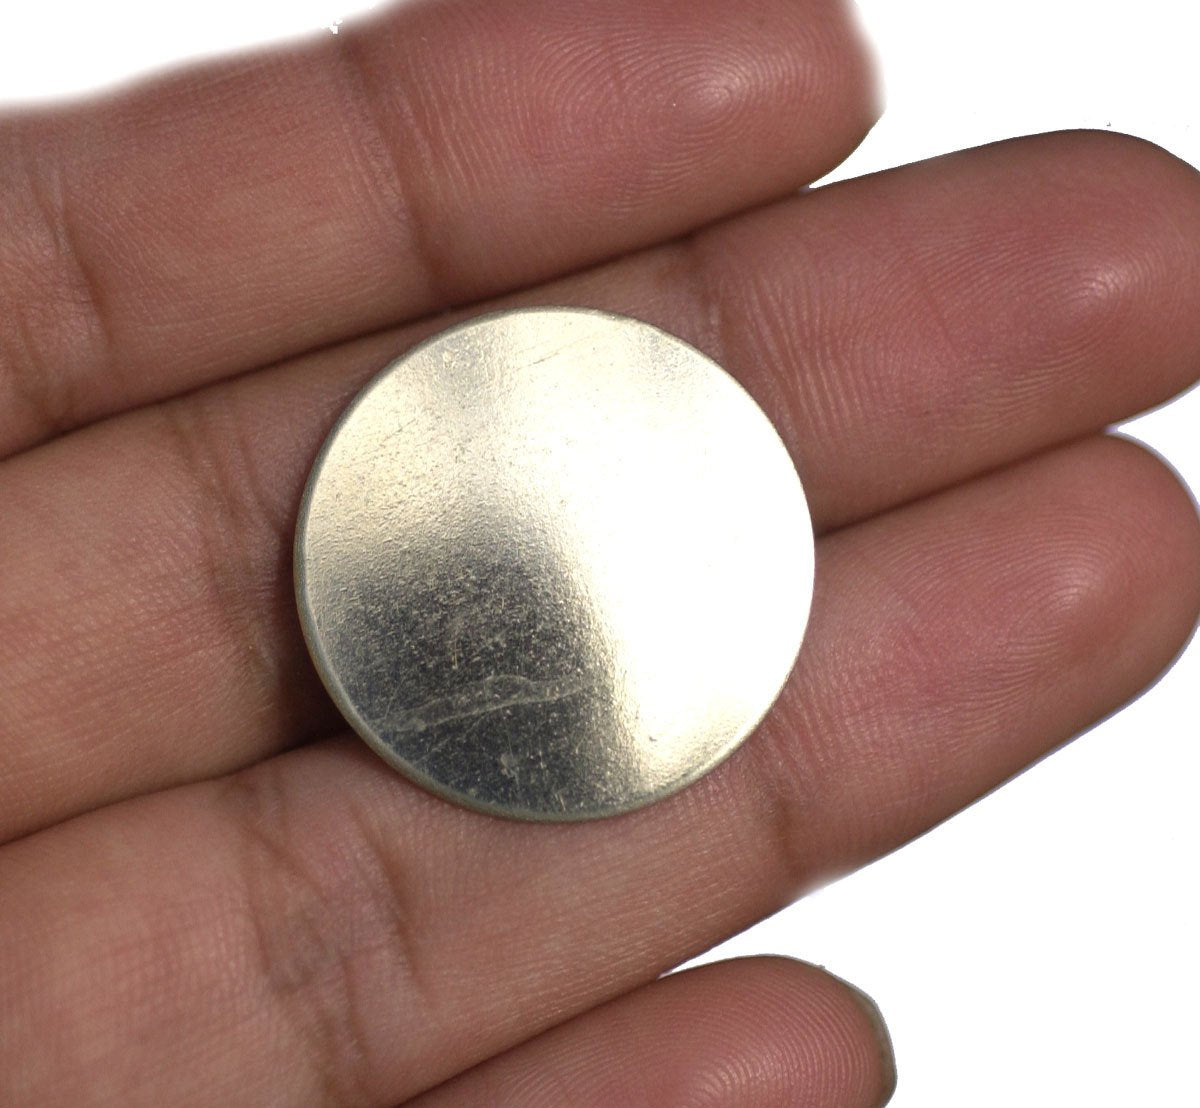 Nickel Silver 25mm Blank, Enameling Stamping Soldering Charms - Jewelry Supplies - 4 Pieces